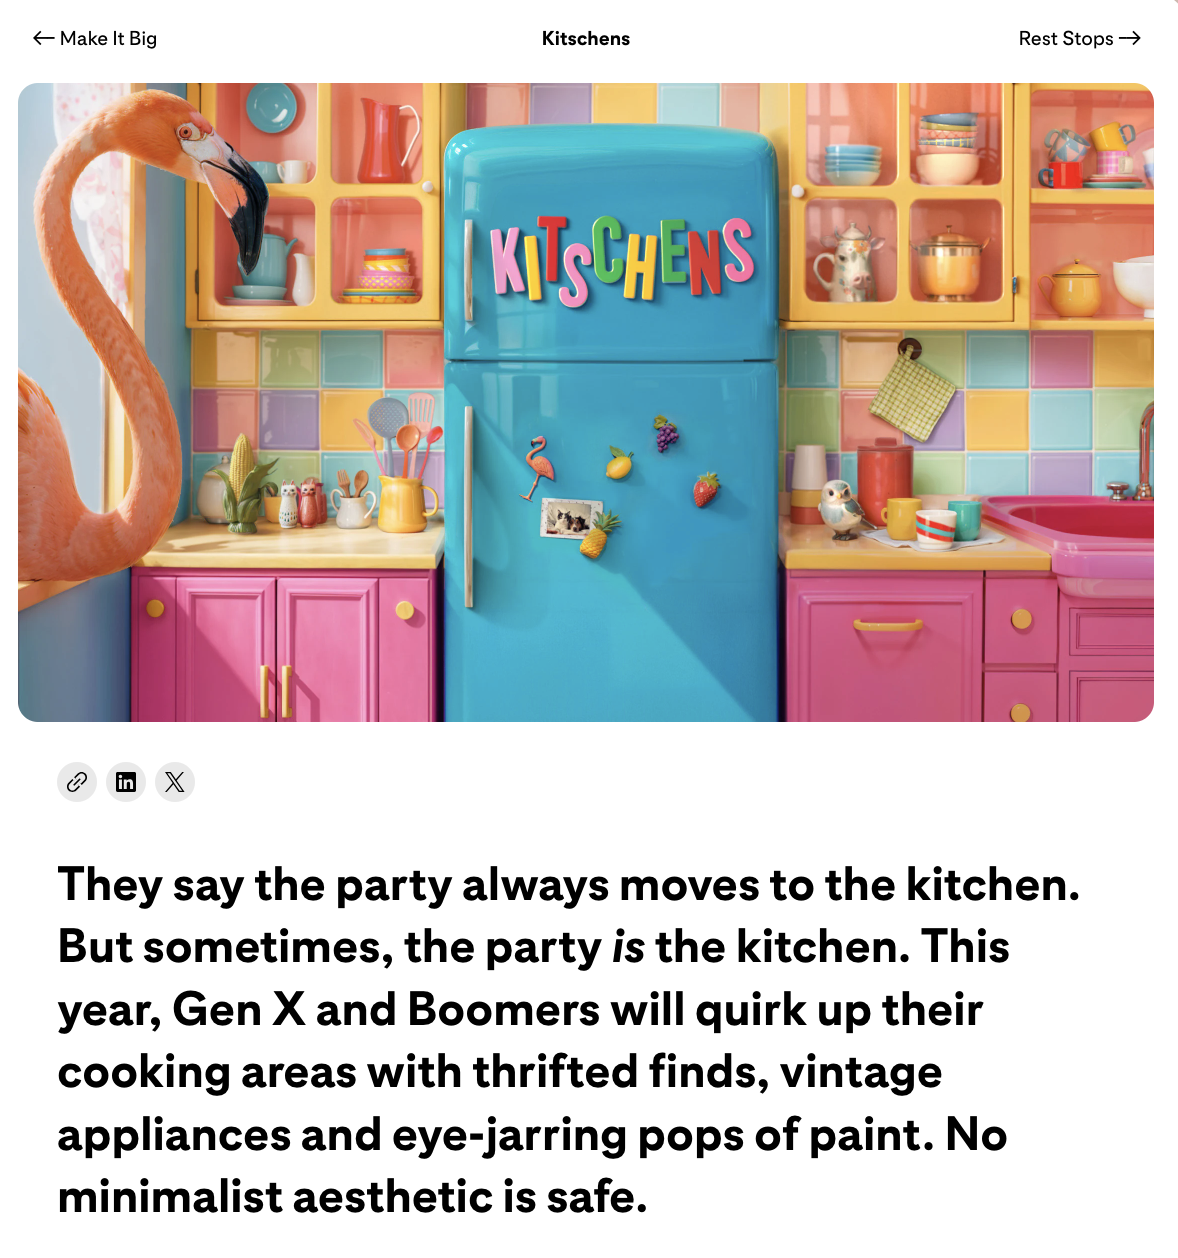 A brightly colored kitchen with orange shelves lined with brightly colored knick knacks. A pin counter with yellow counter tops flocks a turquoise refrigerator. On the refrigerator is letter magnets spelling out "Kitschen."